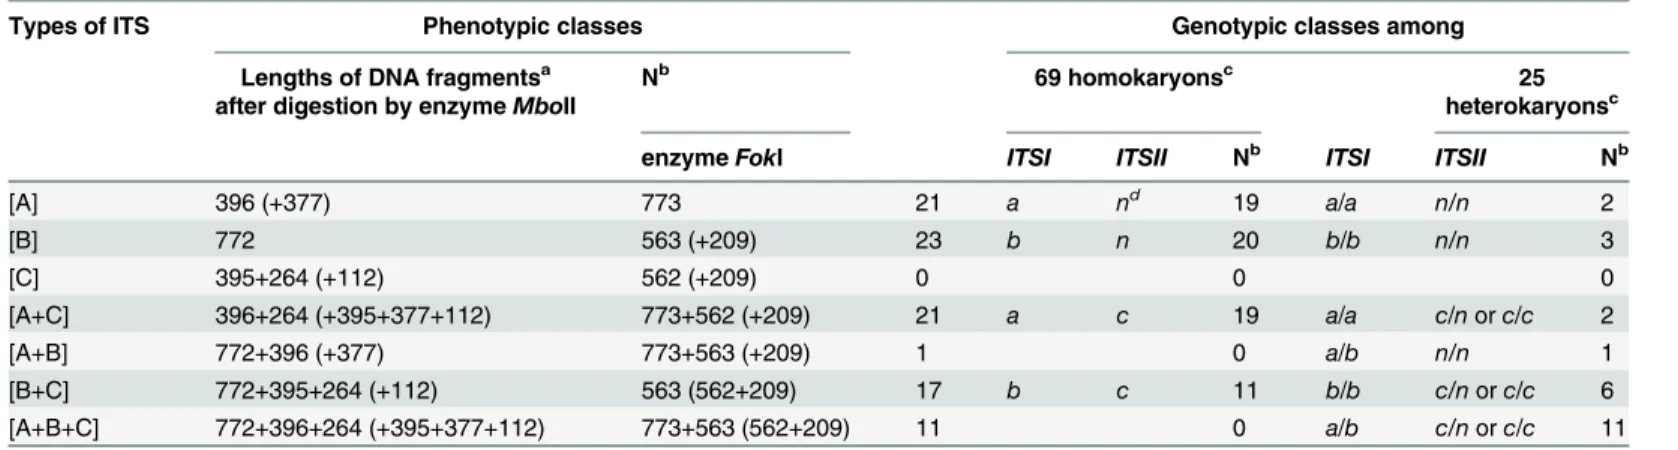 Table 2. ITS phenotypes of 94 single spore isolates of strain CA487 and their genotypic interpretation under the hypothesis of two loci ITSI and ITSII.